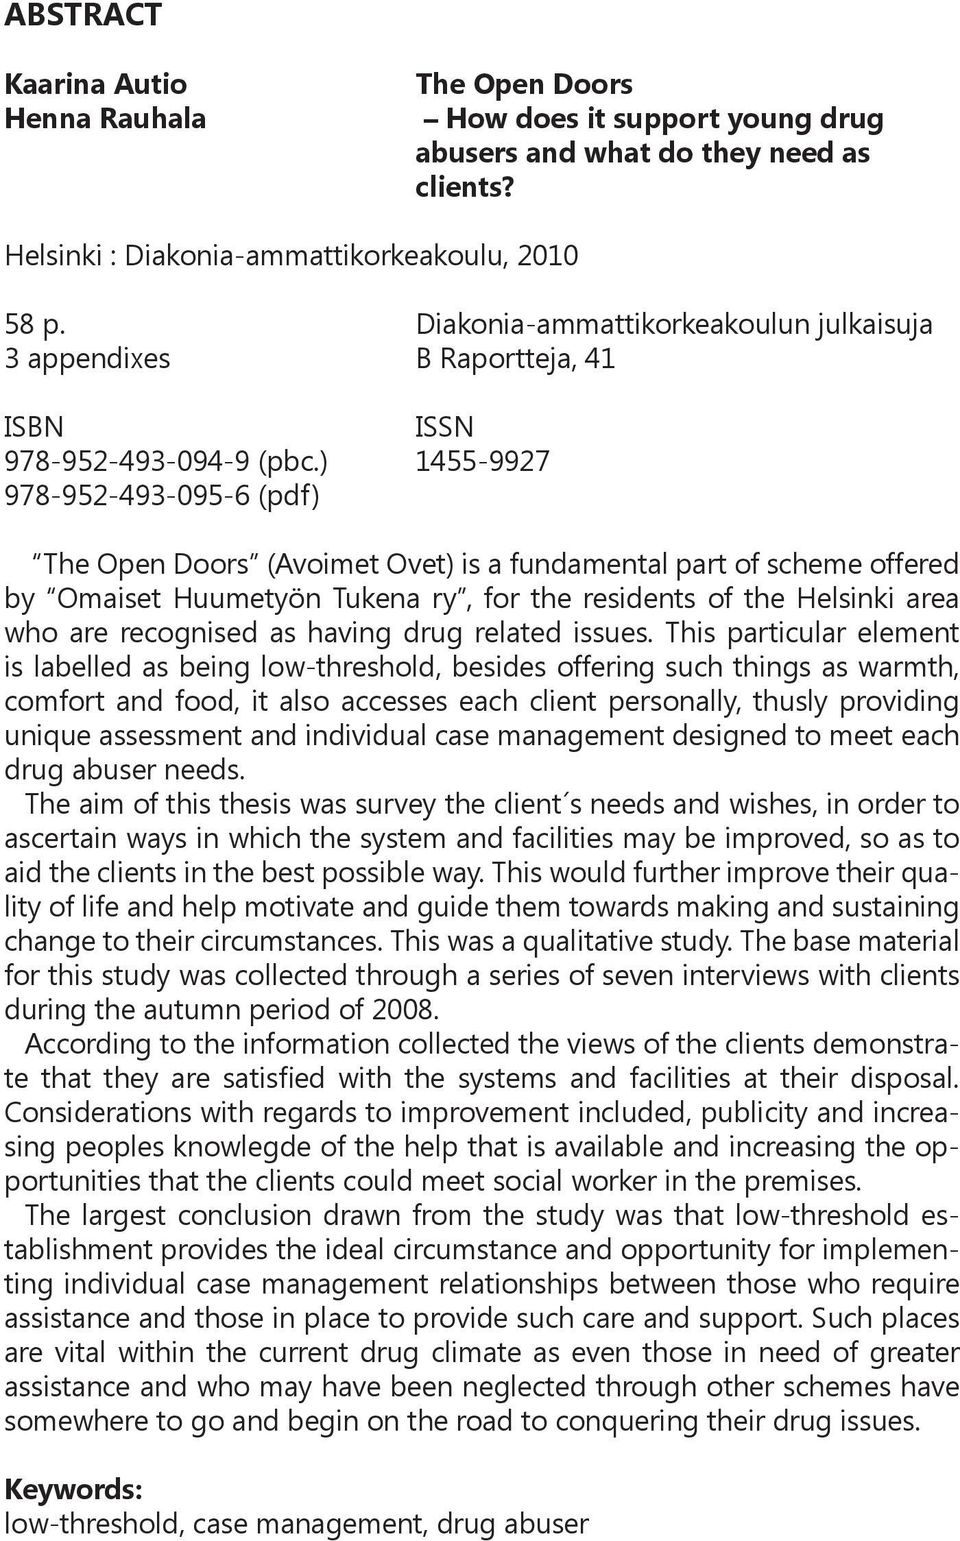 ) 1455-9927 978-952-493-095-6 (pdf) The Open Doors (Avoimet Ovet) is a fundamental part of scheme offered by Omaiset Huumetyön Tukena ry, for the residents of the Helsinki area who are recognised as